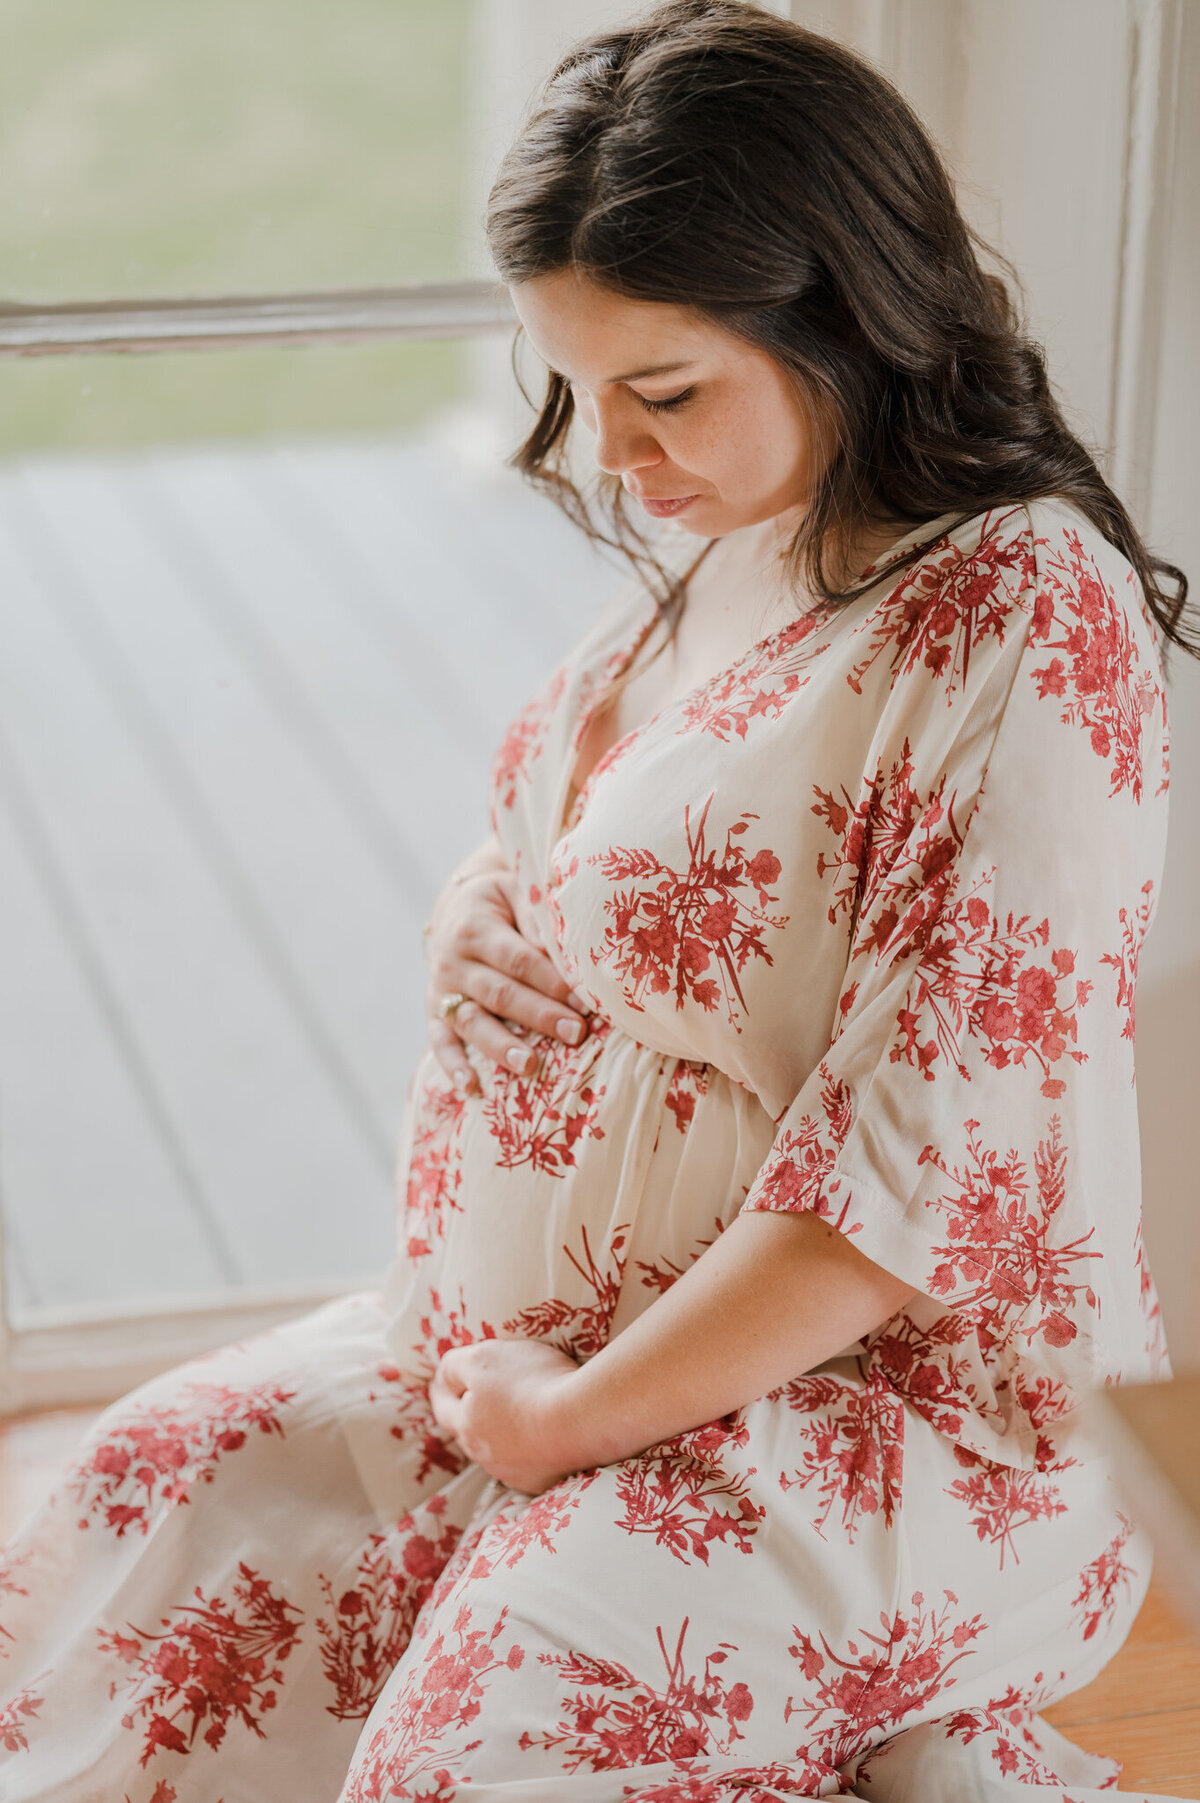 Expecting woman in a gown sits inside a window and cradles her bump.